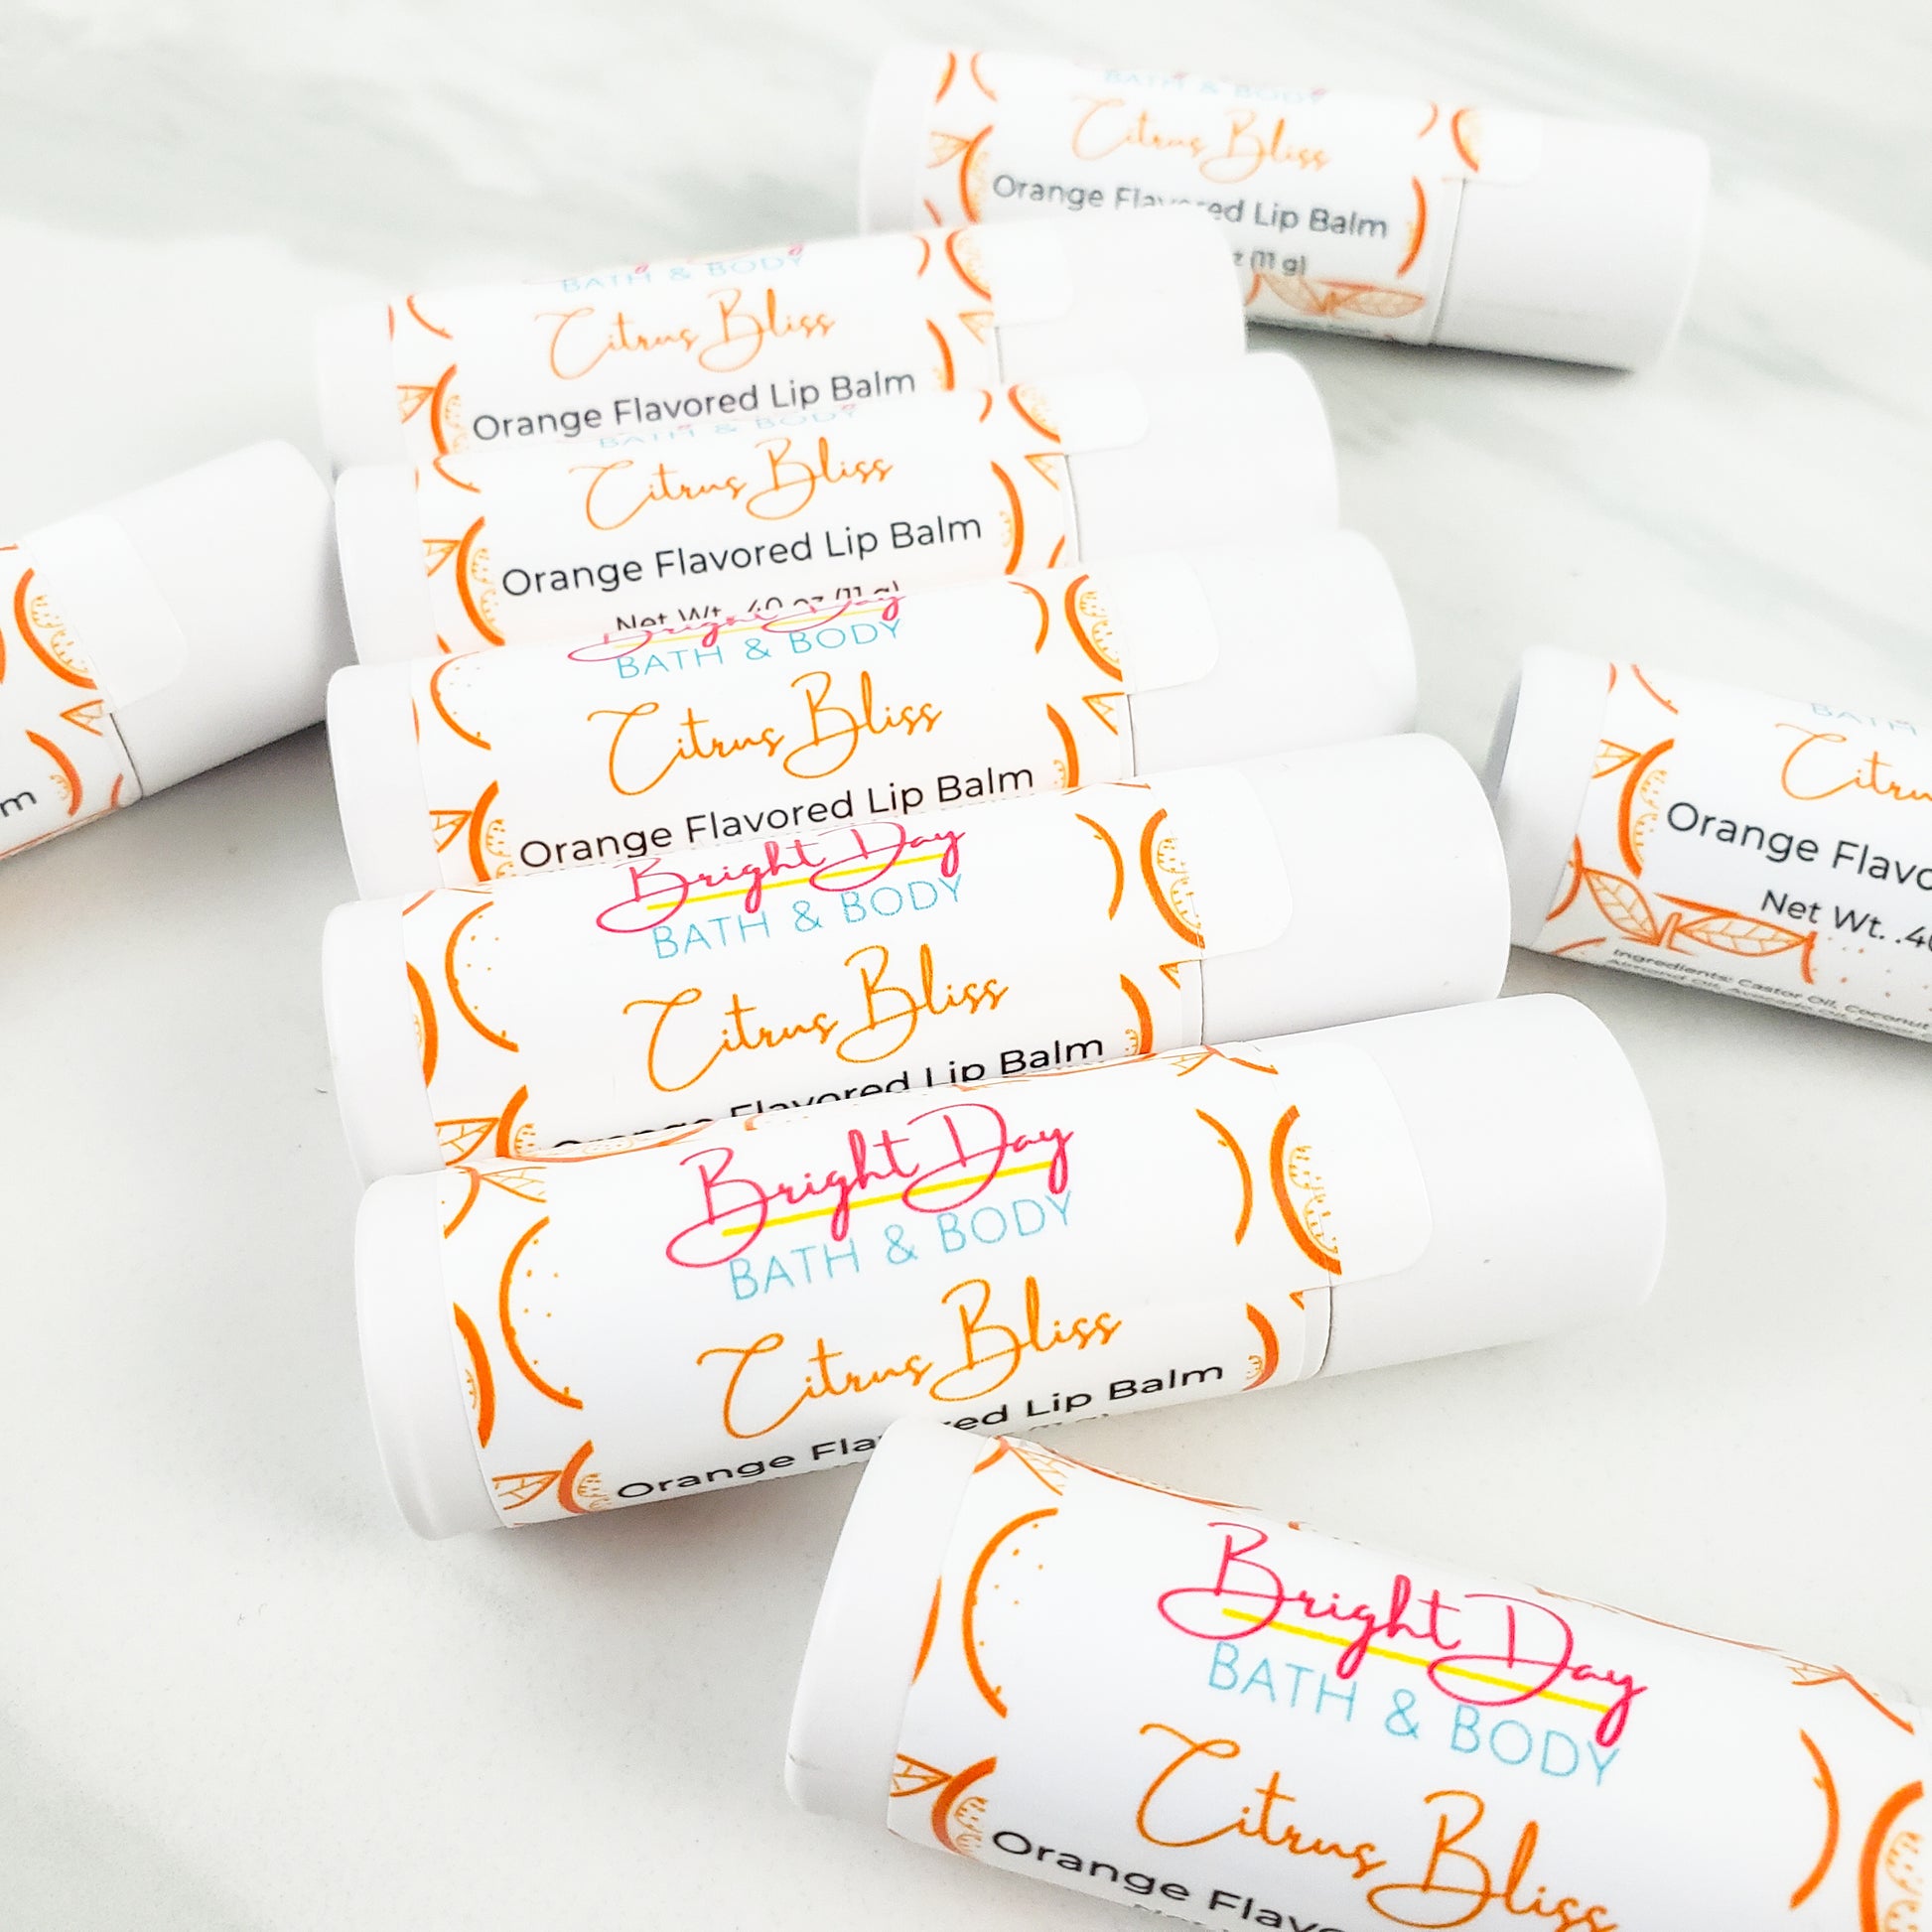 several Citrus Bliss lip balms in a row